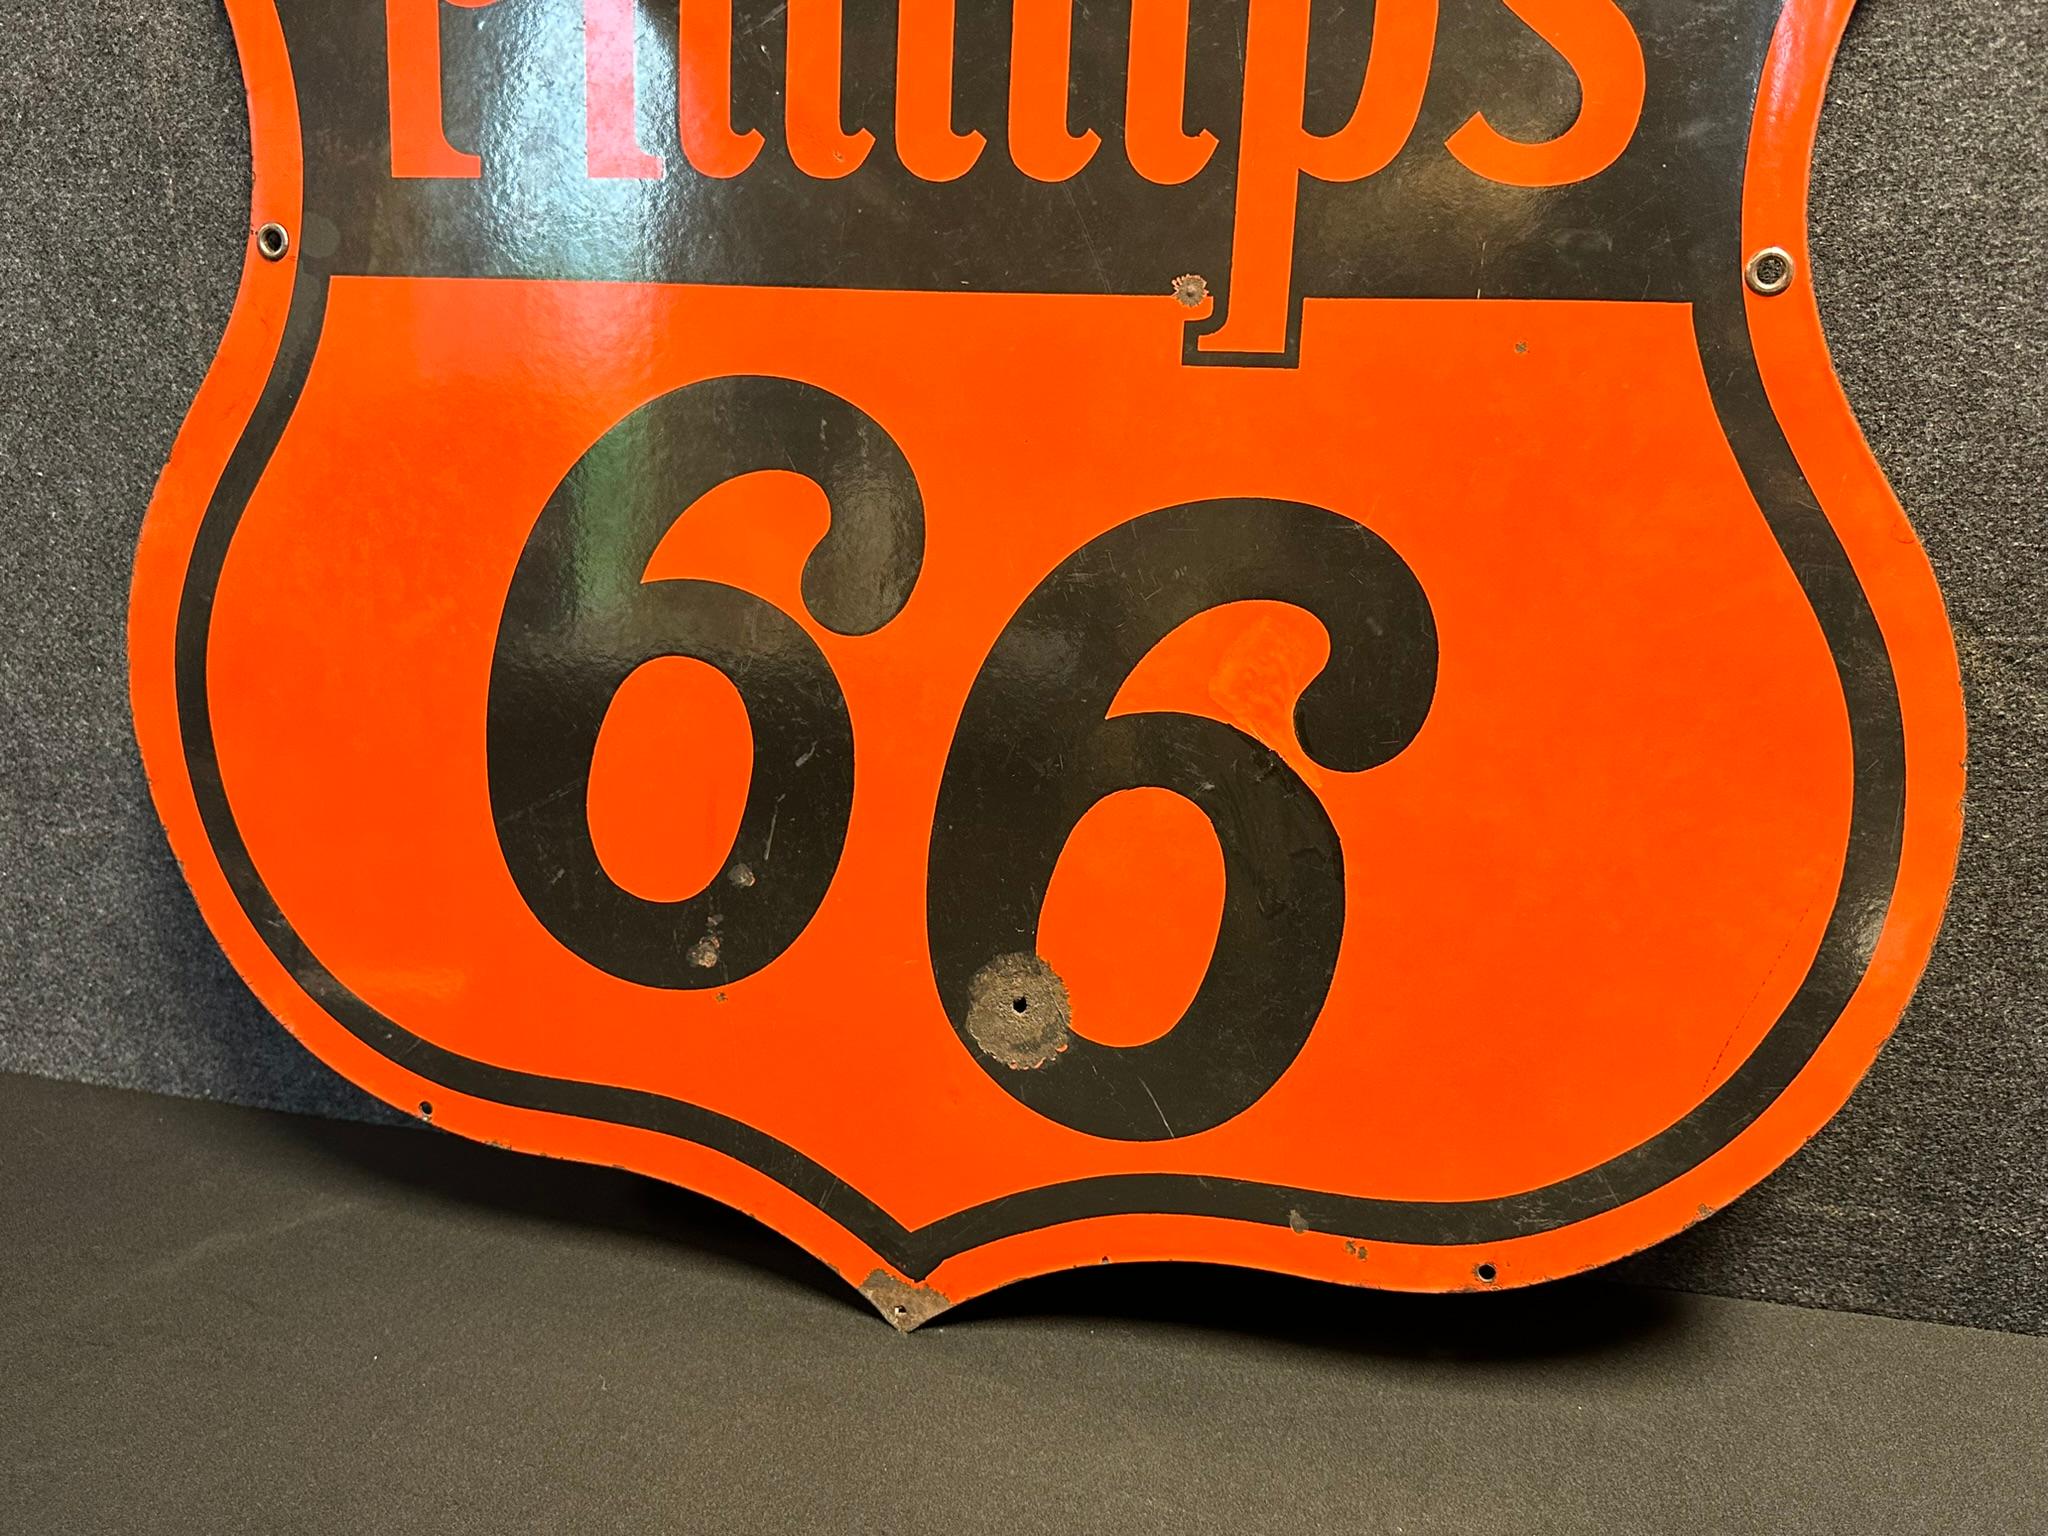 Phillips 66 Double Sided Porcelain 30" Curbside Advertising Sign Ca. 1930s